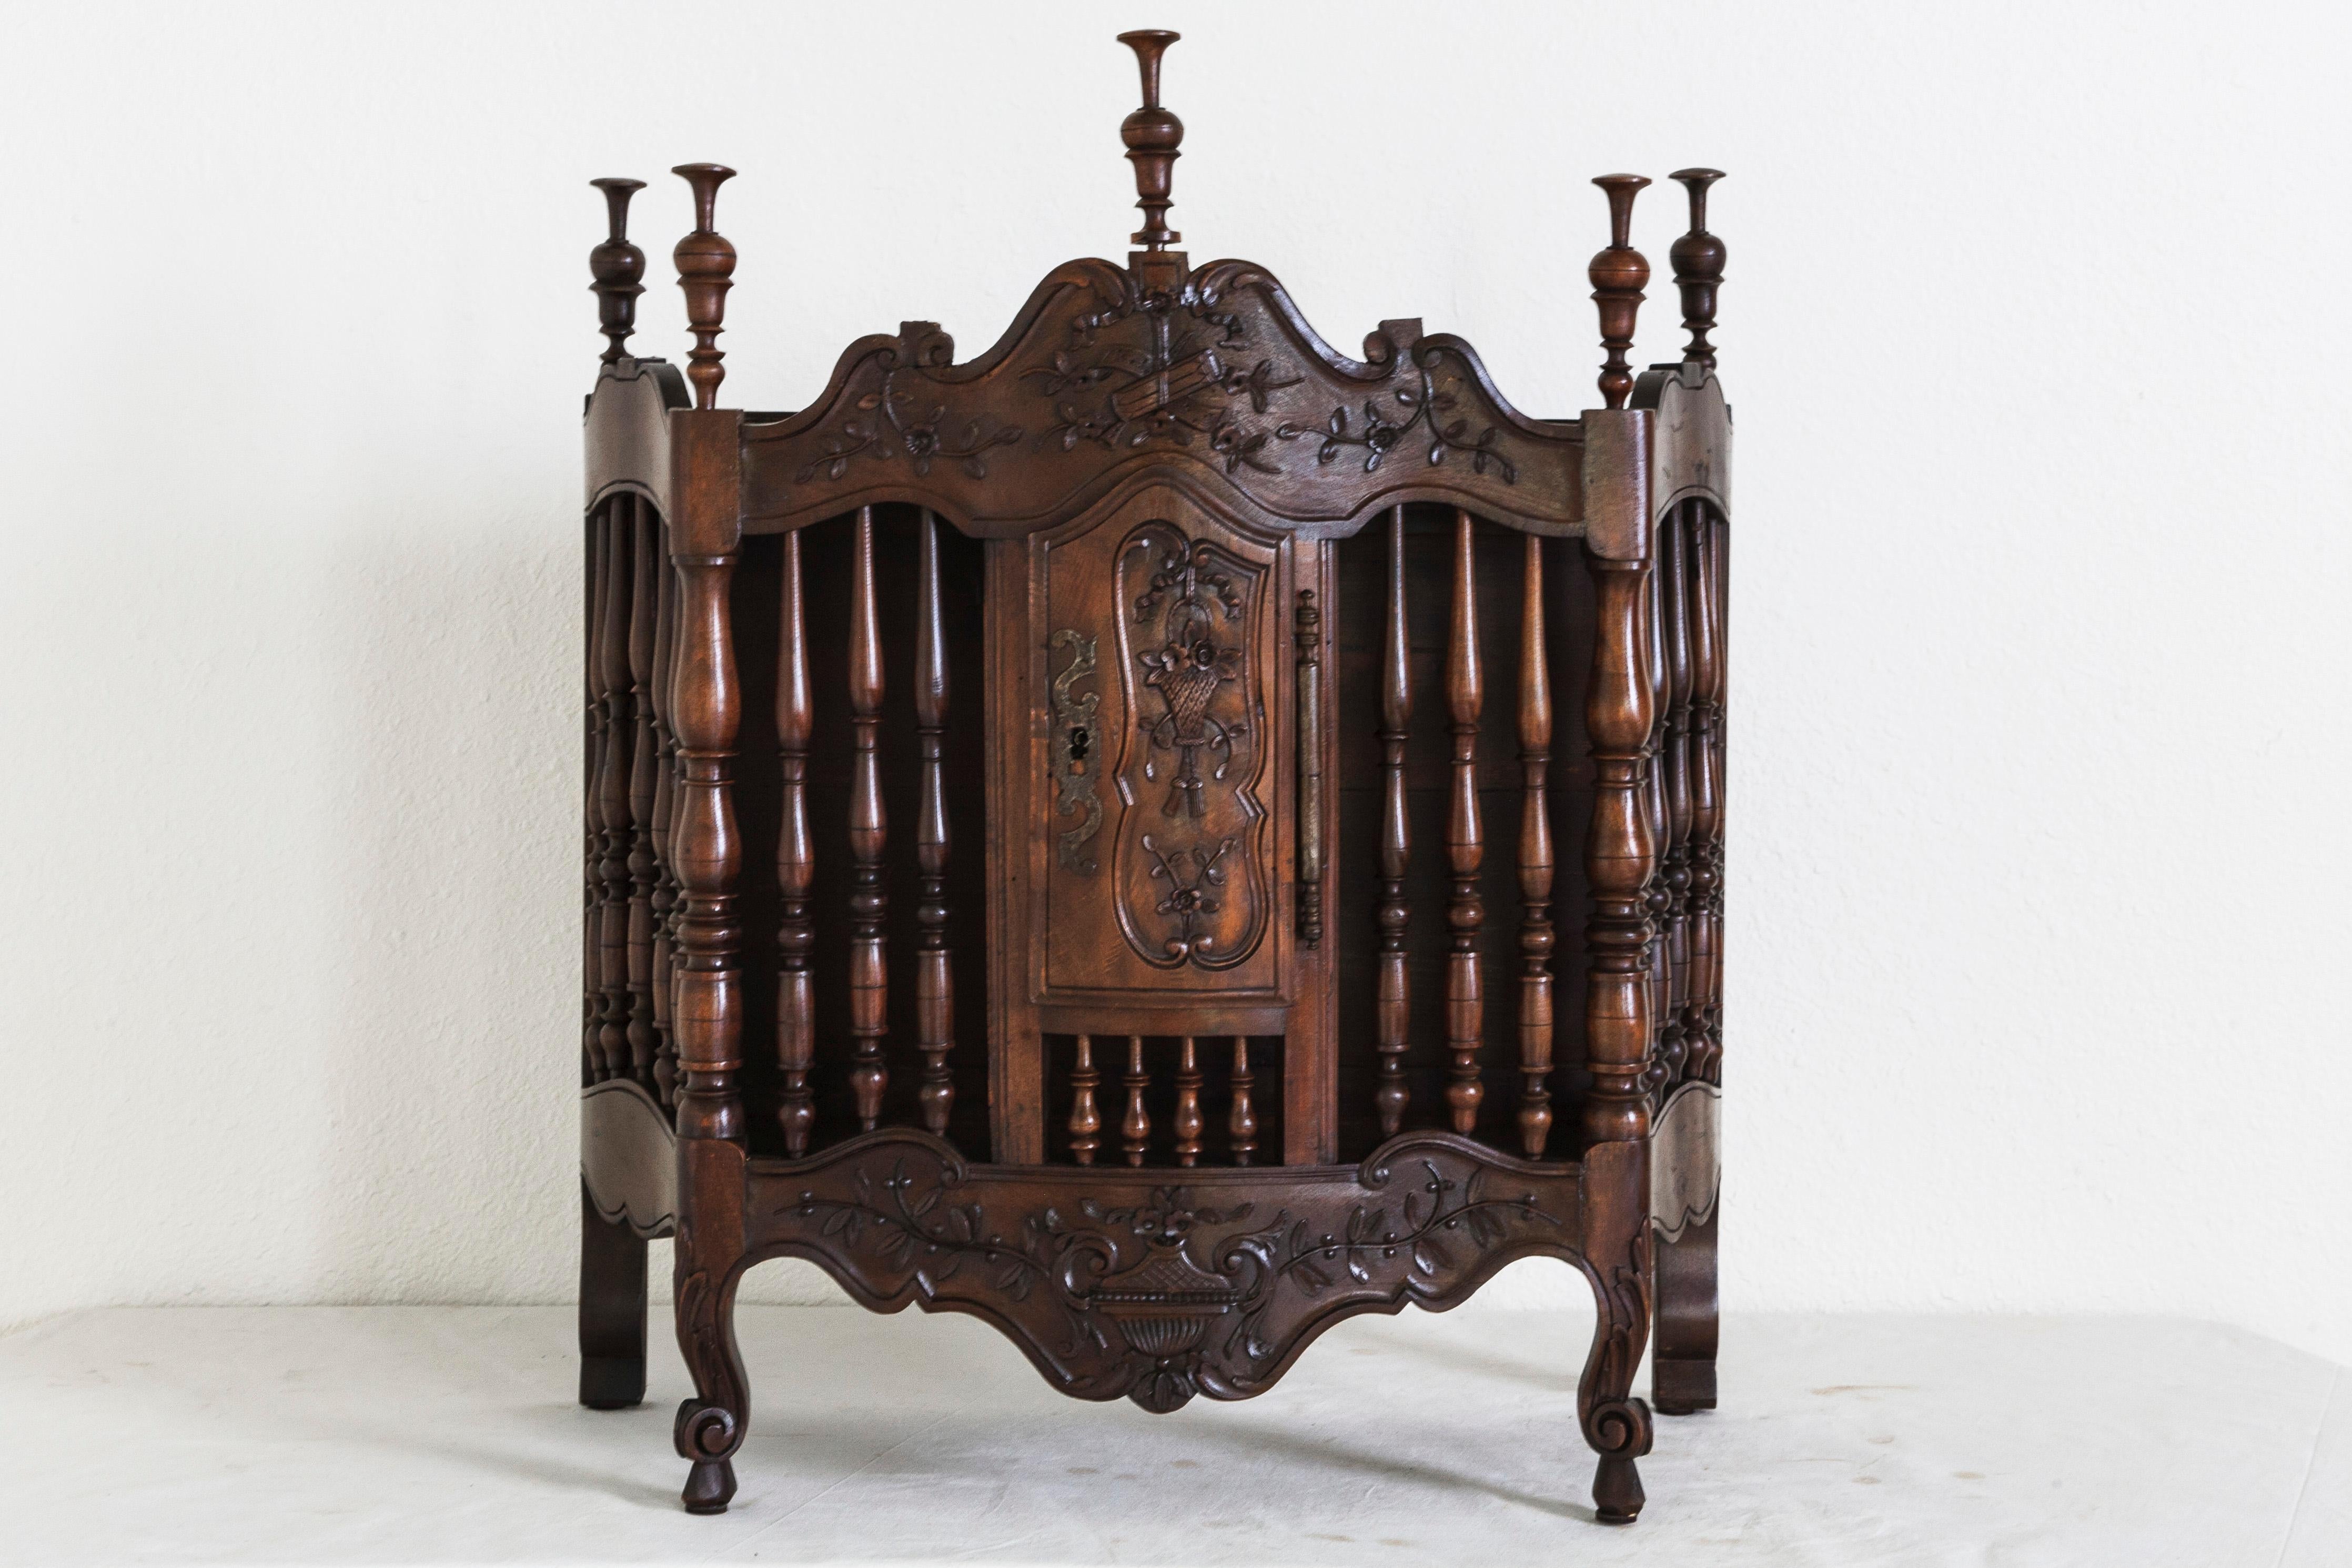 This 19th century hand-carved walnut panetière from Provence was created in the finest detail. Originally used to store French baguettes or long loaves of bread, panetieres were meant to sit on a petrin (dough chest) but eventually grew into